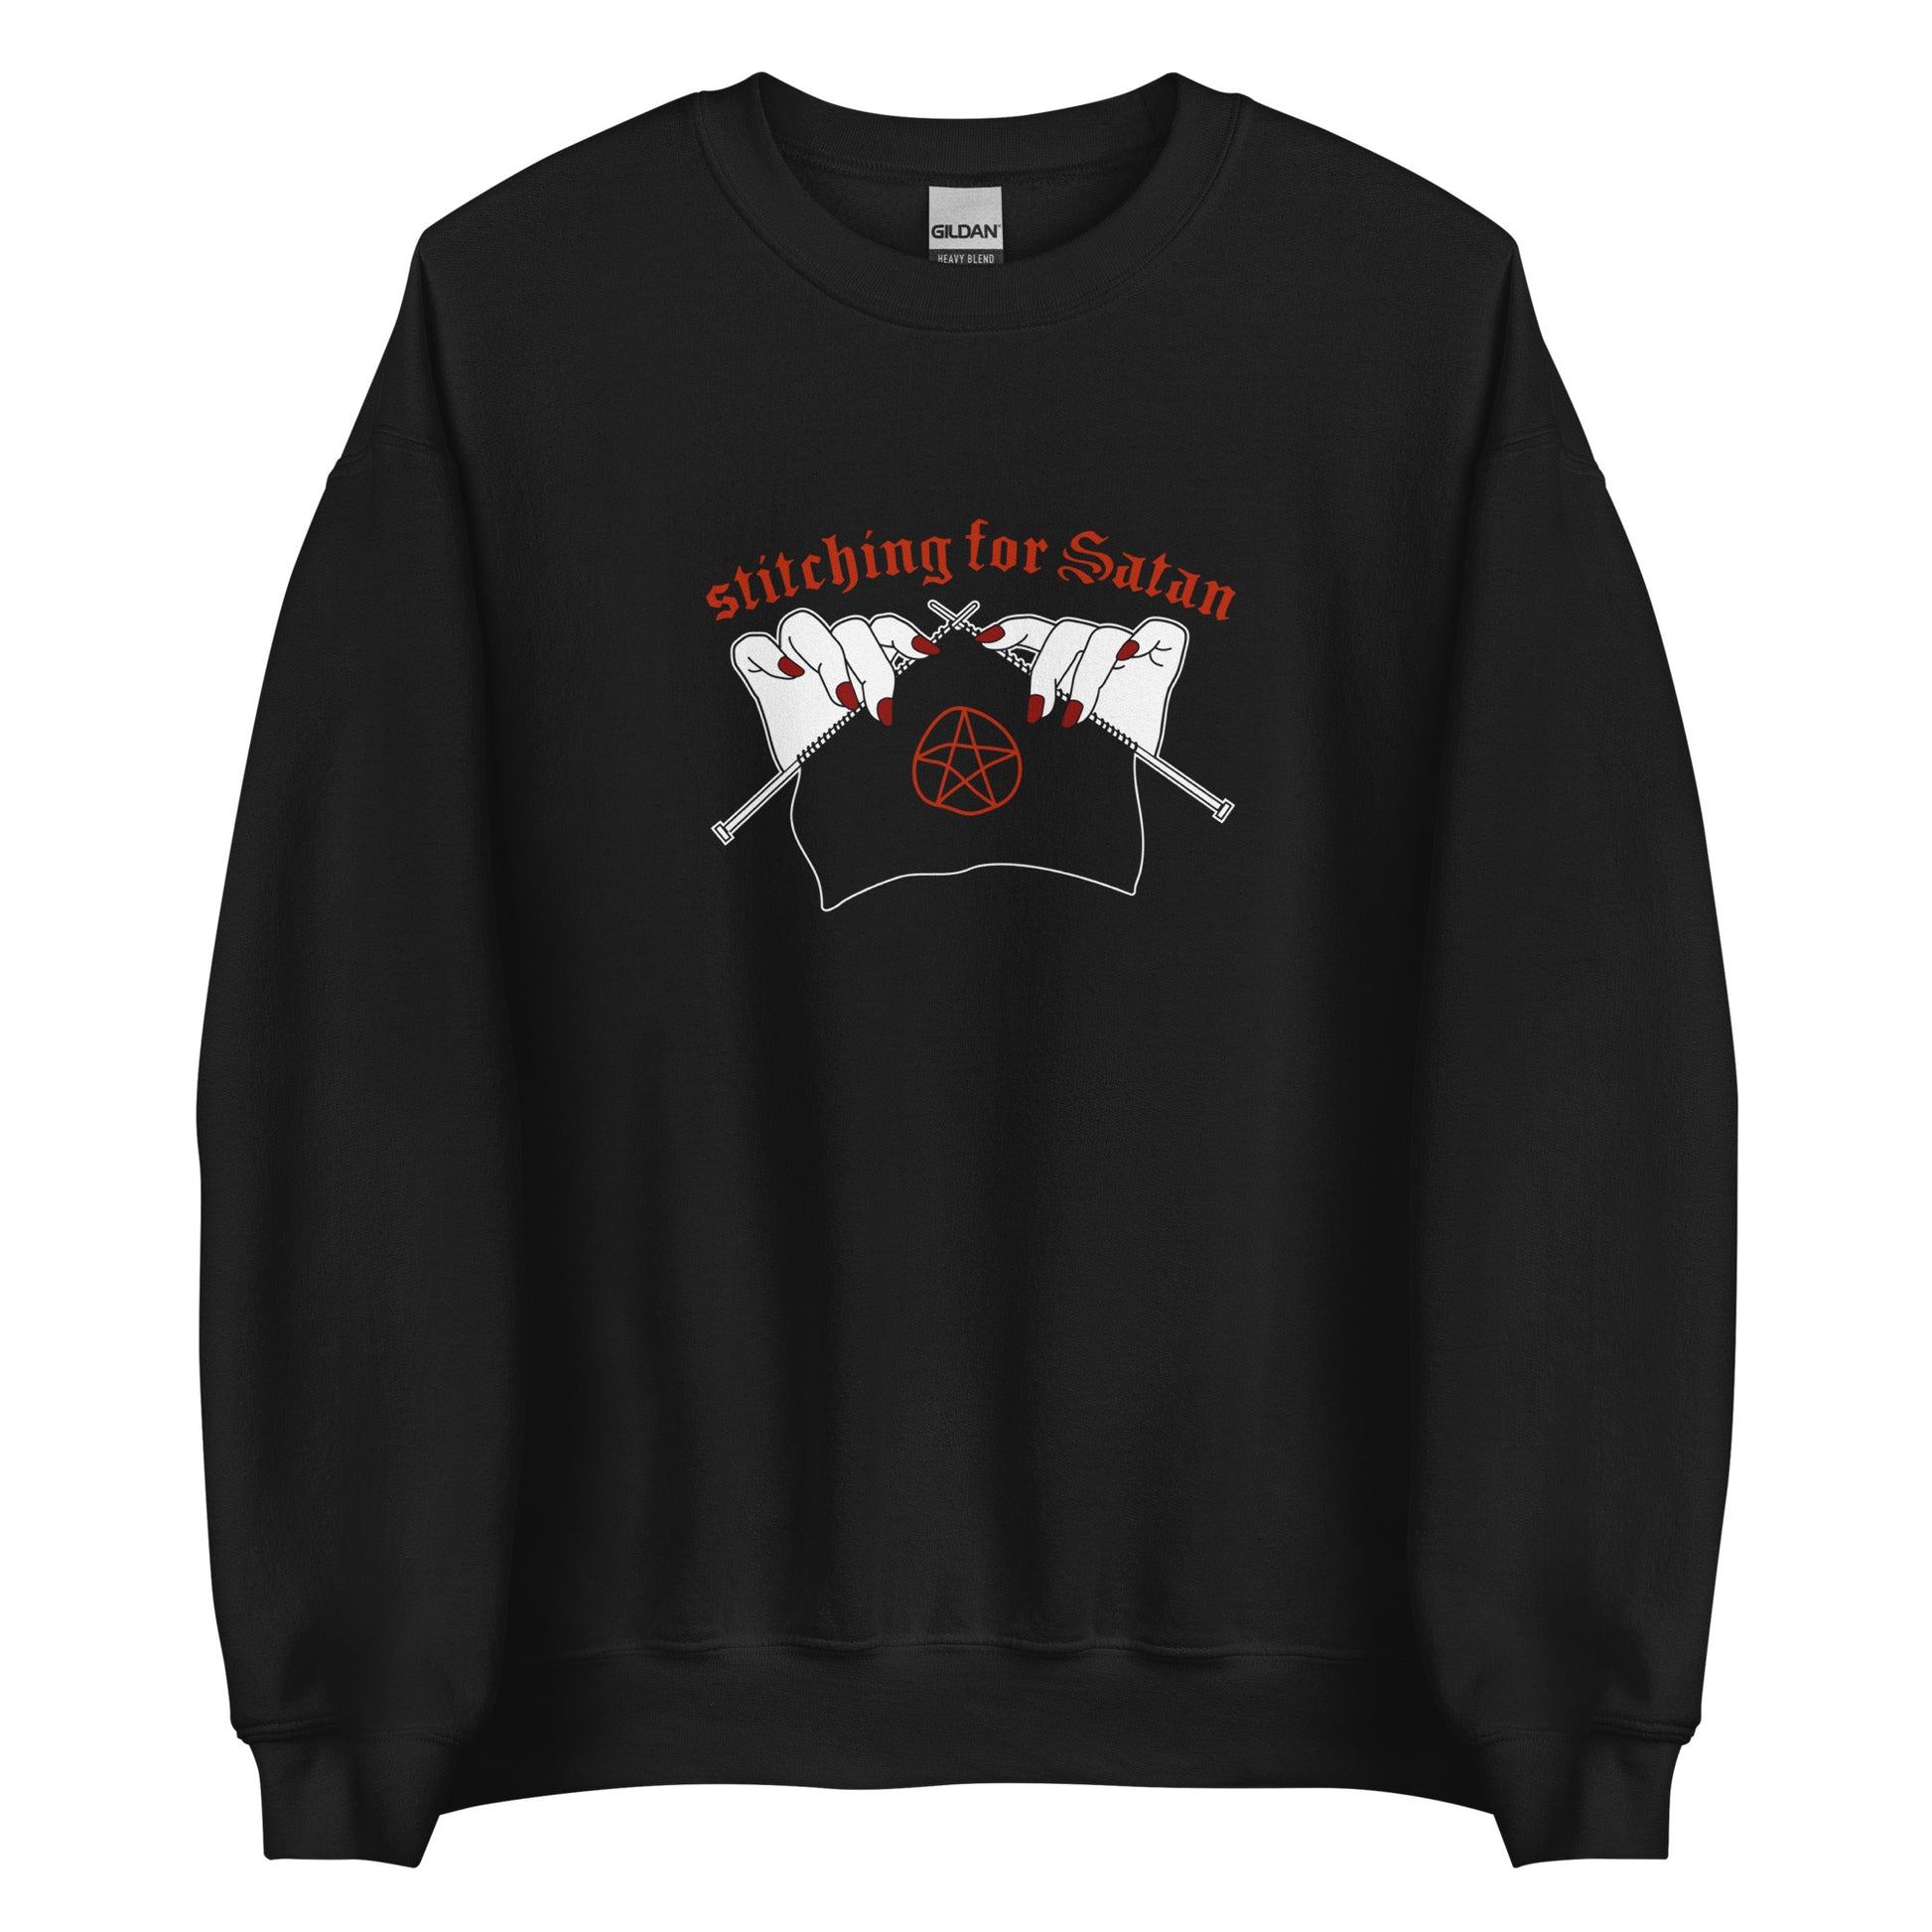 A black crewneck sweatshirt featuring an illustration of pale white hands with red fingernails holding knitting needles. Fabric on the needles features a red pentagram. Text above the hands reads "stitching for Satan" in a gothc red font.